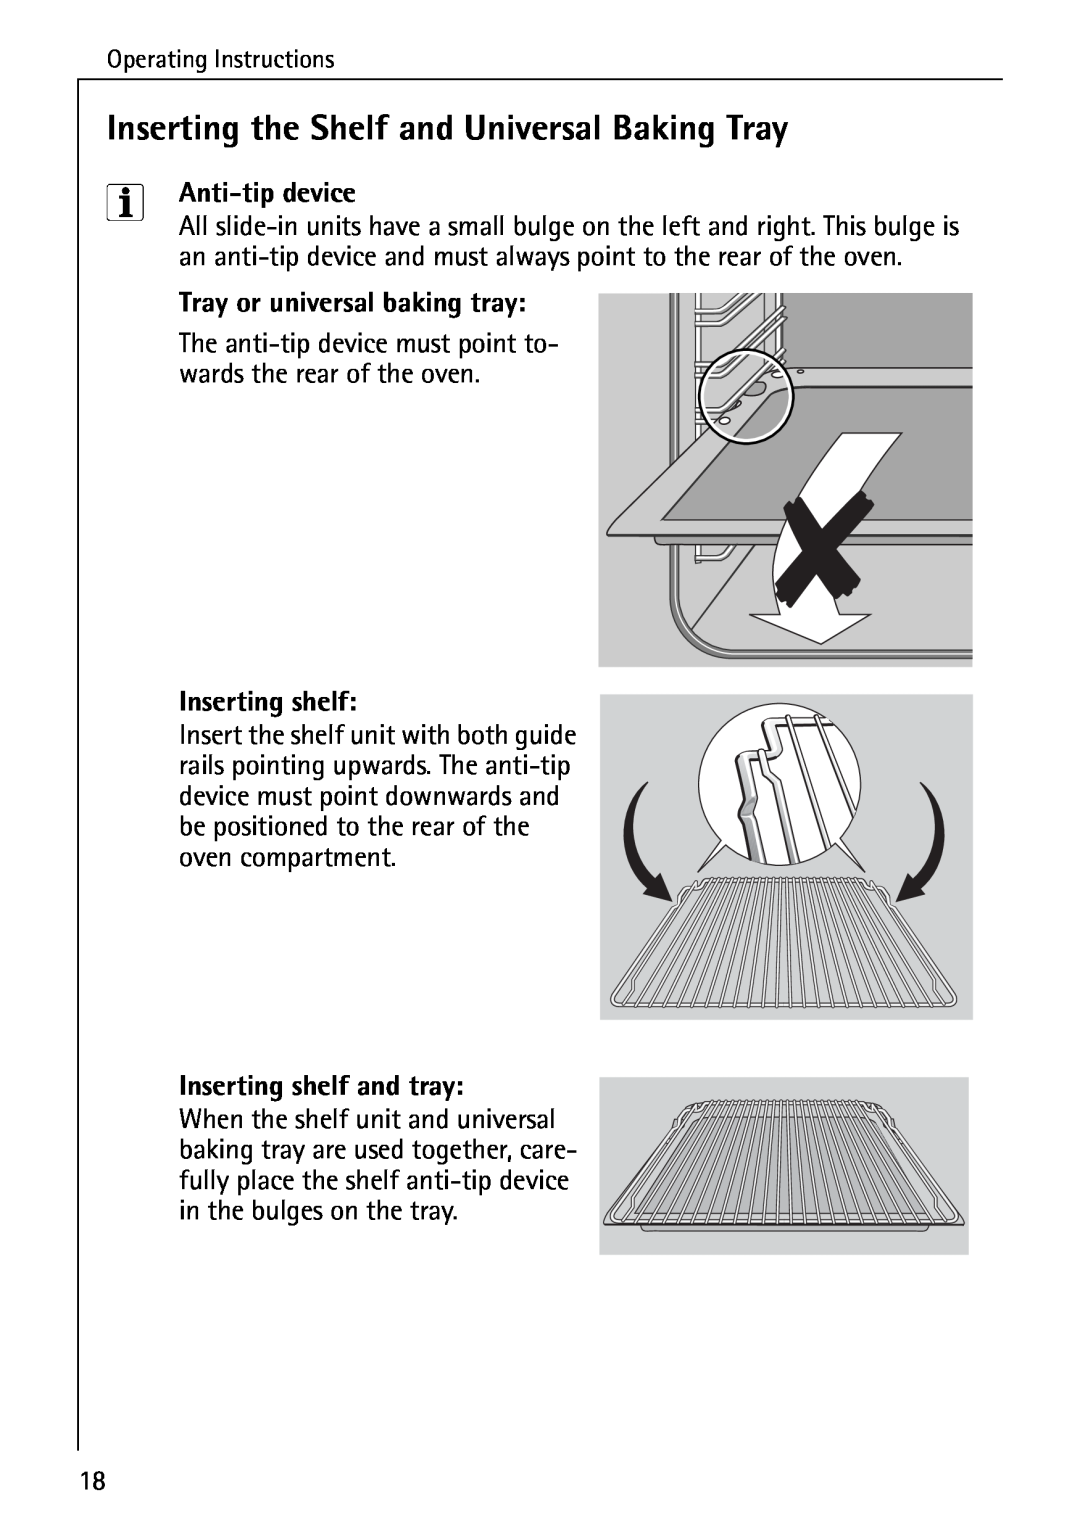 Electrolux B6140-1 manual Inserting the Shelf and Universal Baking Tray, Anti-tip device, Tray or universal baking tray 